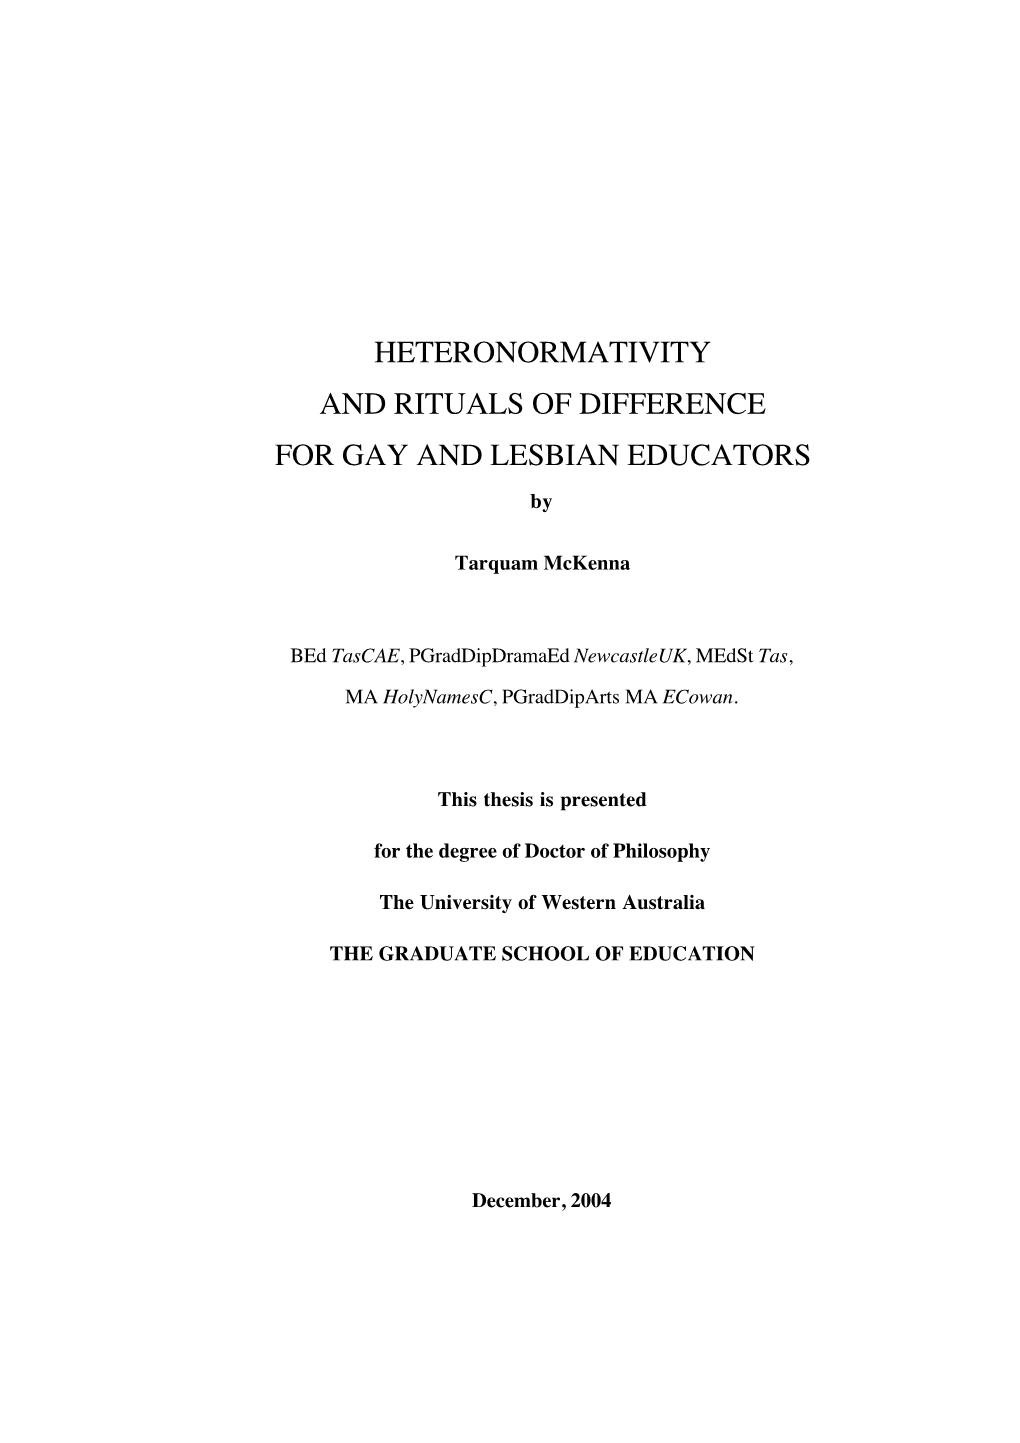 HETERONORMATIVITY and RITUALS of DIFFERENCE for GAY and LESBIAN EDUCATORS By